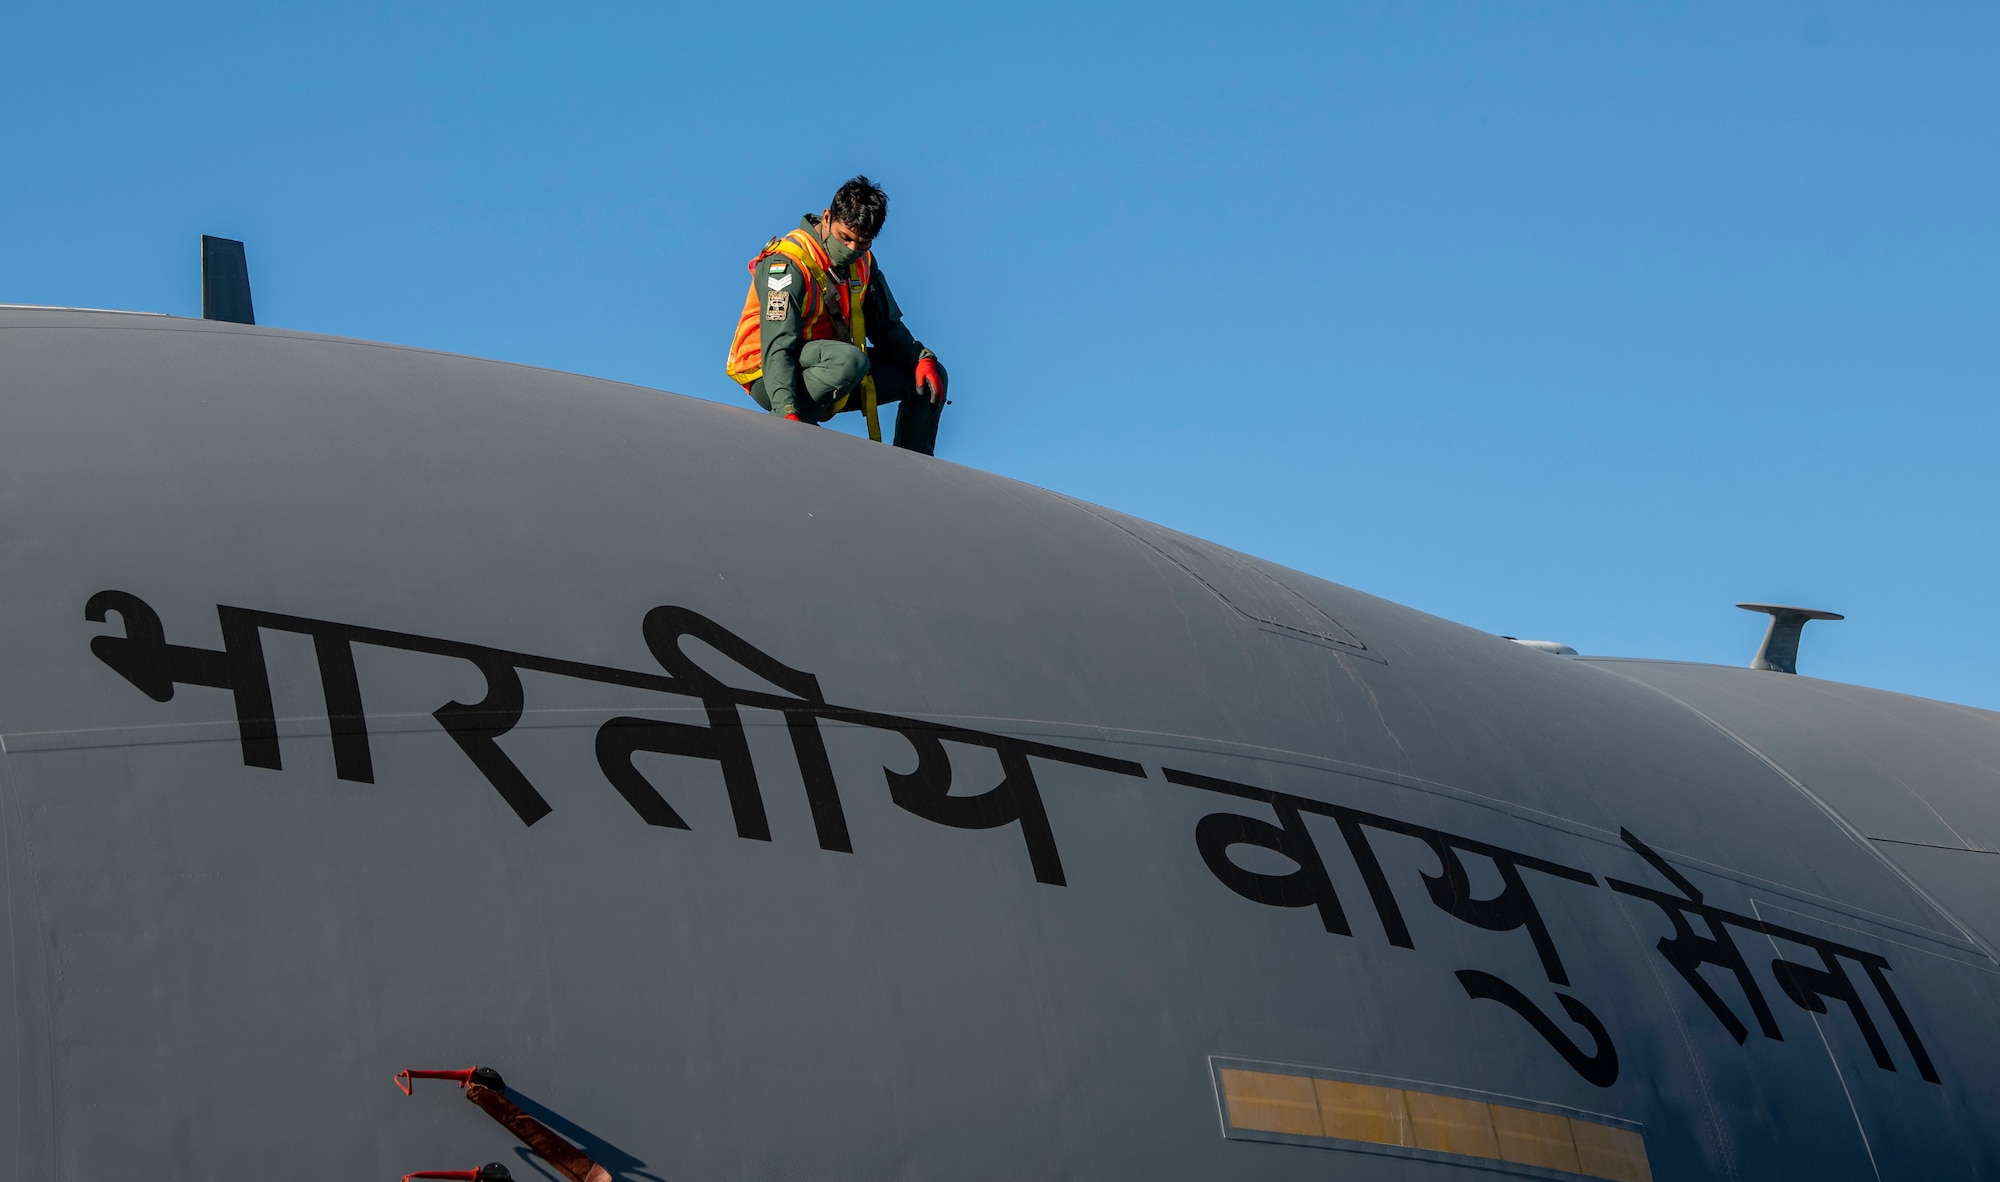 A member of the Indian air force 28th Wing inspects an Indian air force C-17 Globemaster III at Dover Air Force Base, Delaware, Nov. 20, 2020. Dover AFB annually supports $3.5 billion worth of FMS operations due to its strategic location and 436th Aerial Port Squadron, the largest aerial port in the Department of Defense. The United States and India have shared interests in promoting global security, stability and economic prosperity. (U.S. Air Force photo by Senior Airman Christopher Quail)